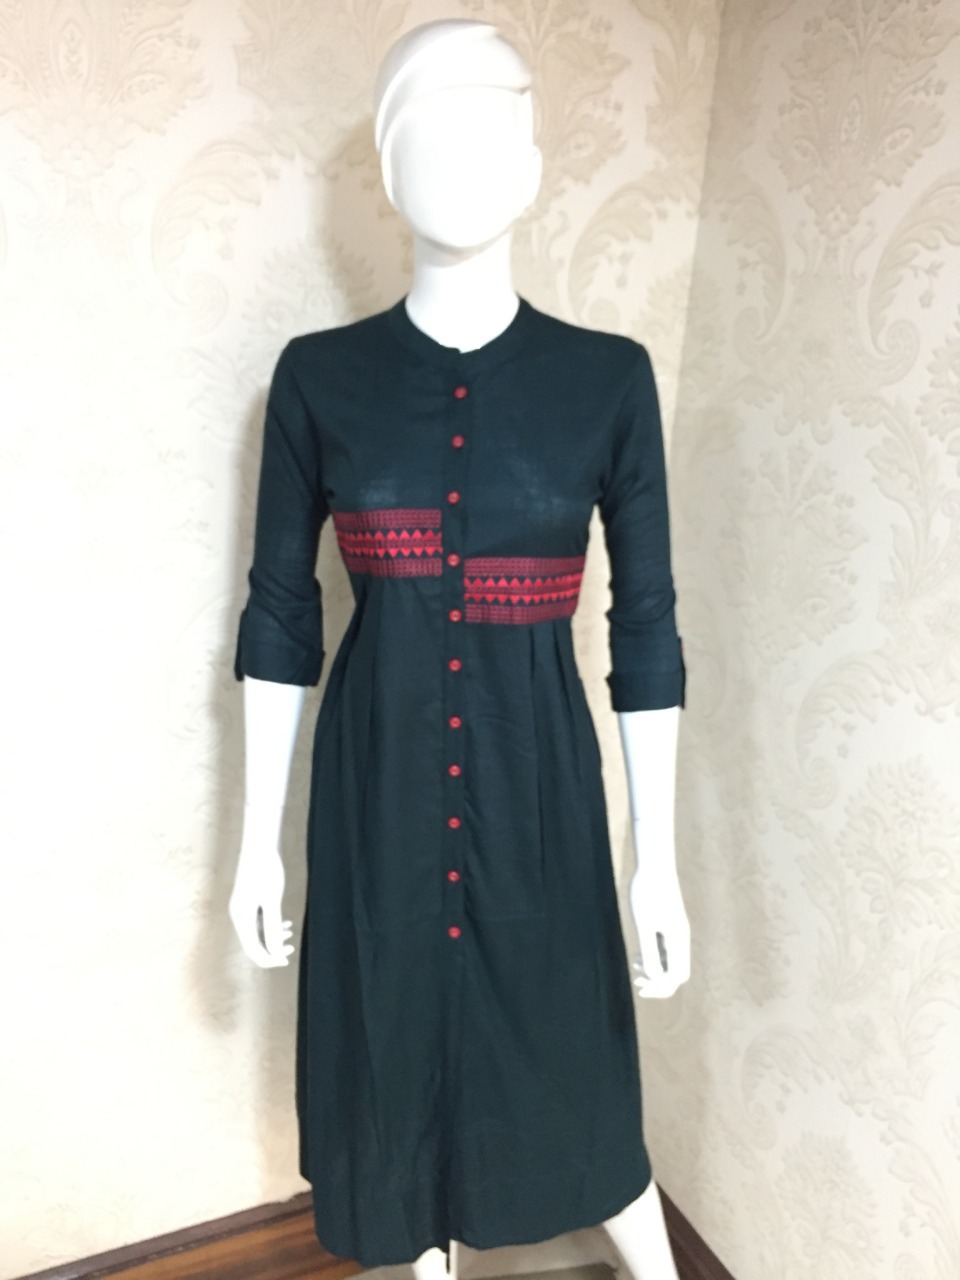 FANCY EMBROIDERED KURTI